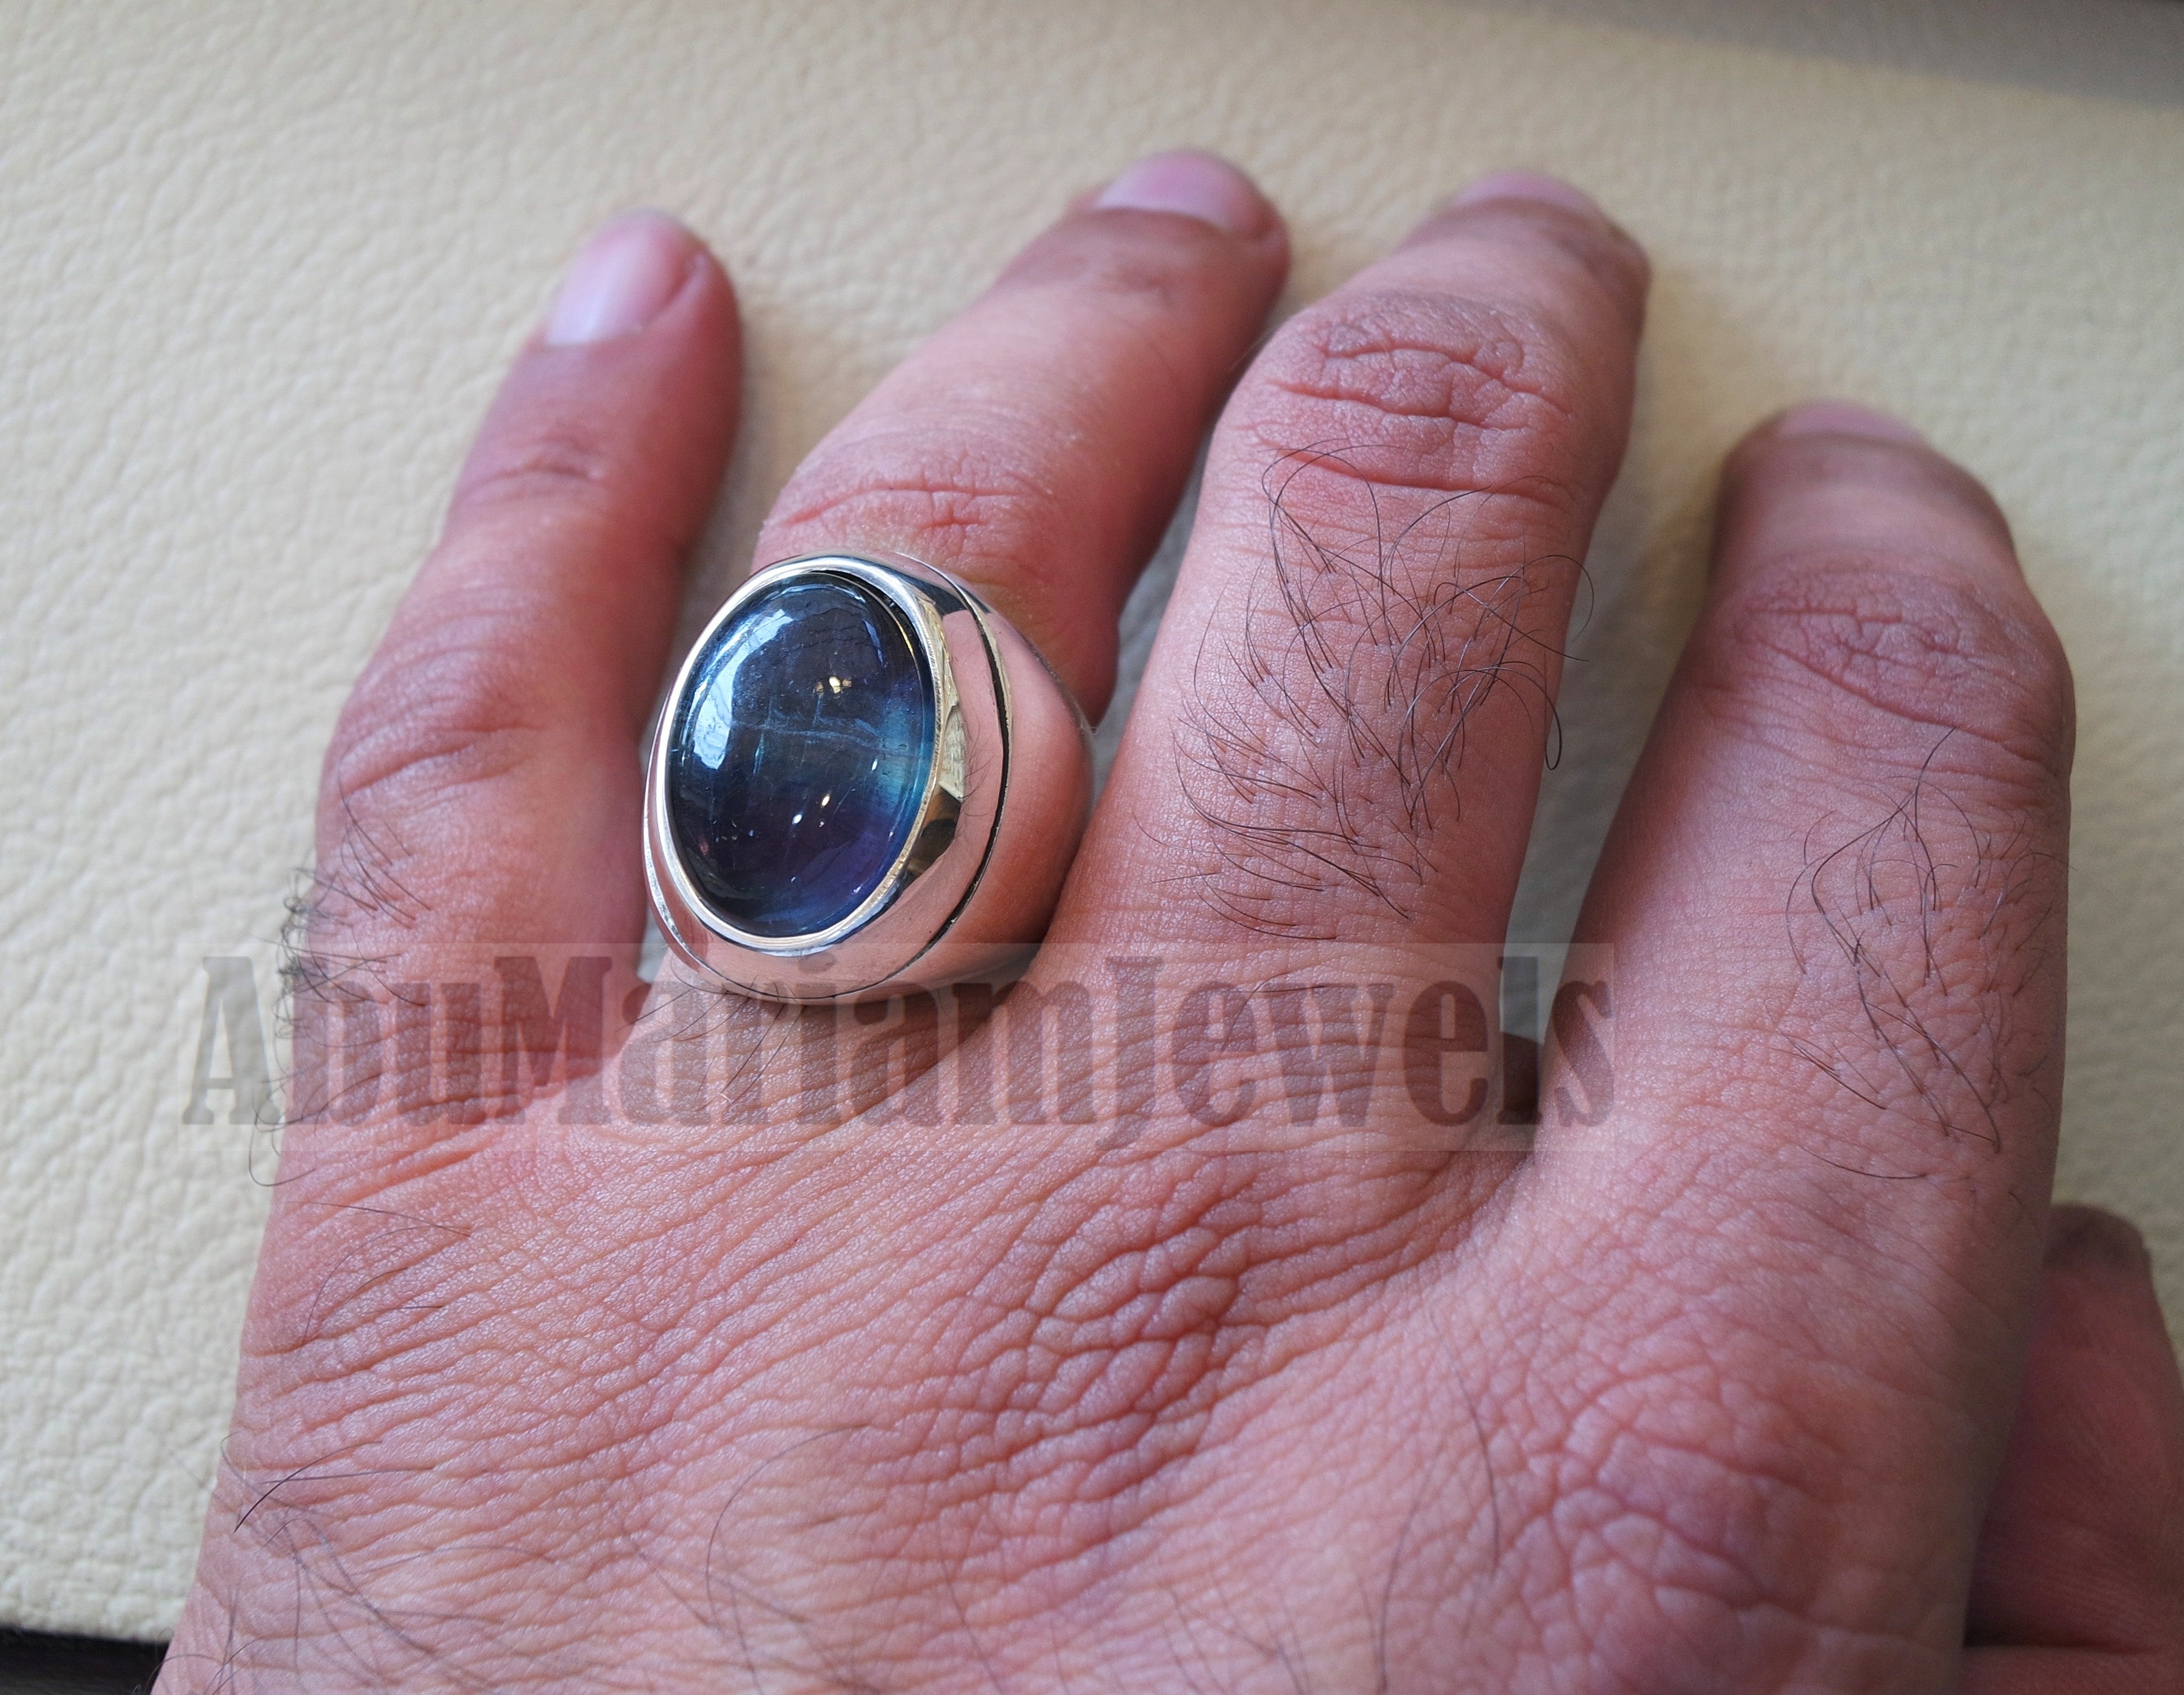 natural multi color fluorite purple blue green huge men ring sterling silver 925 unique stone all sizes jewelry fast shipping style